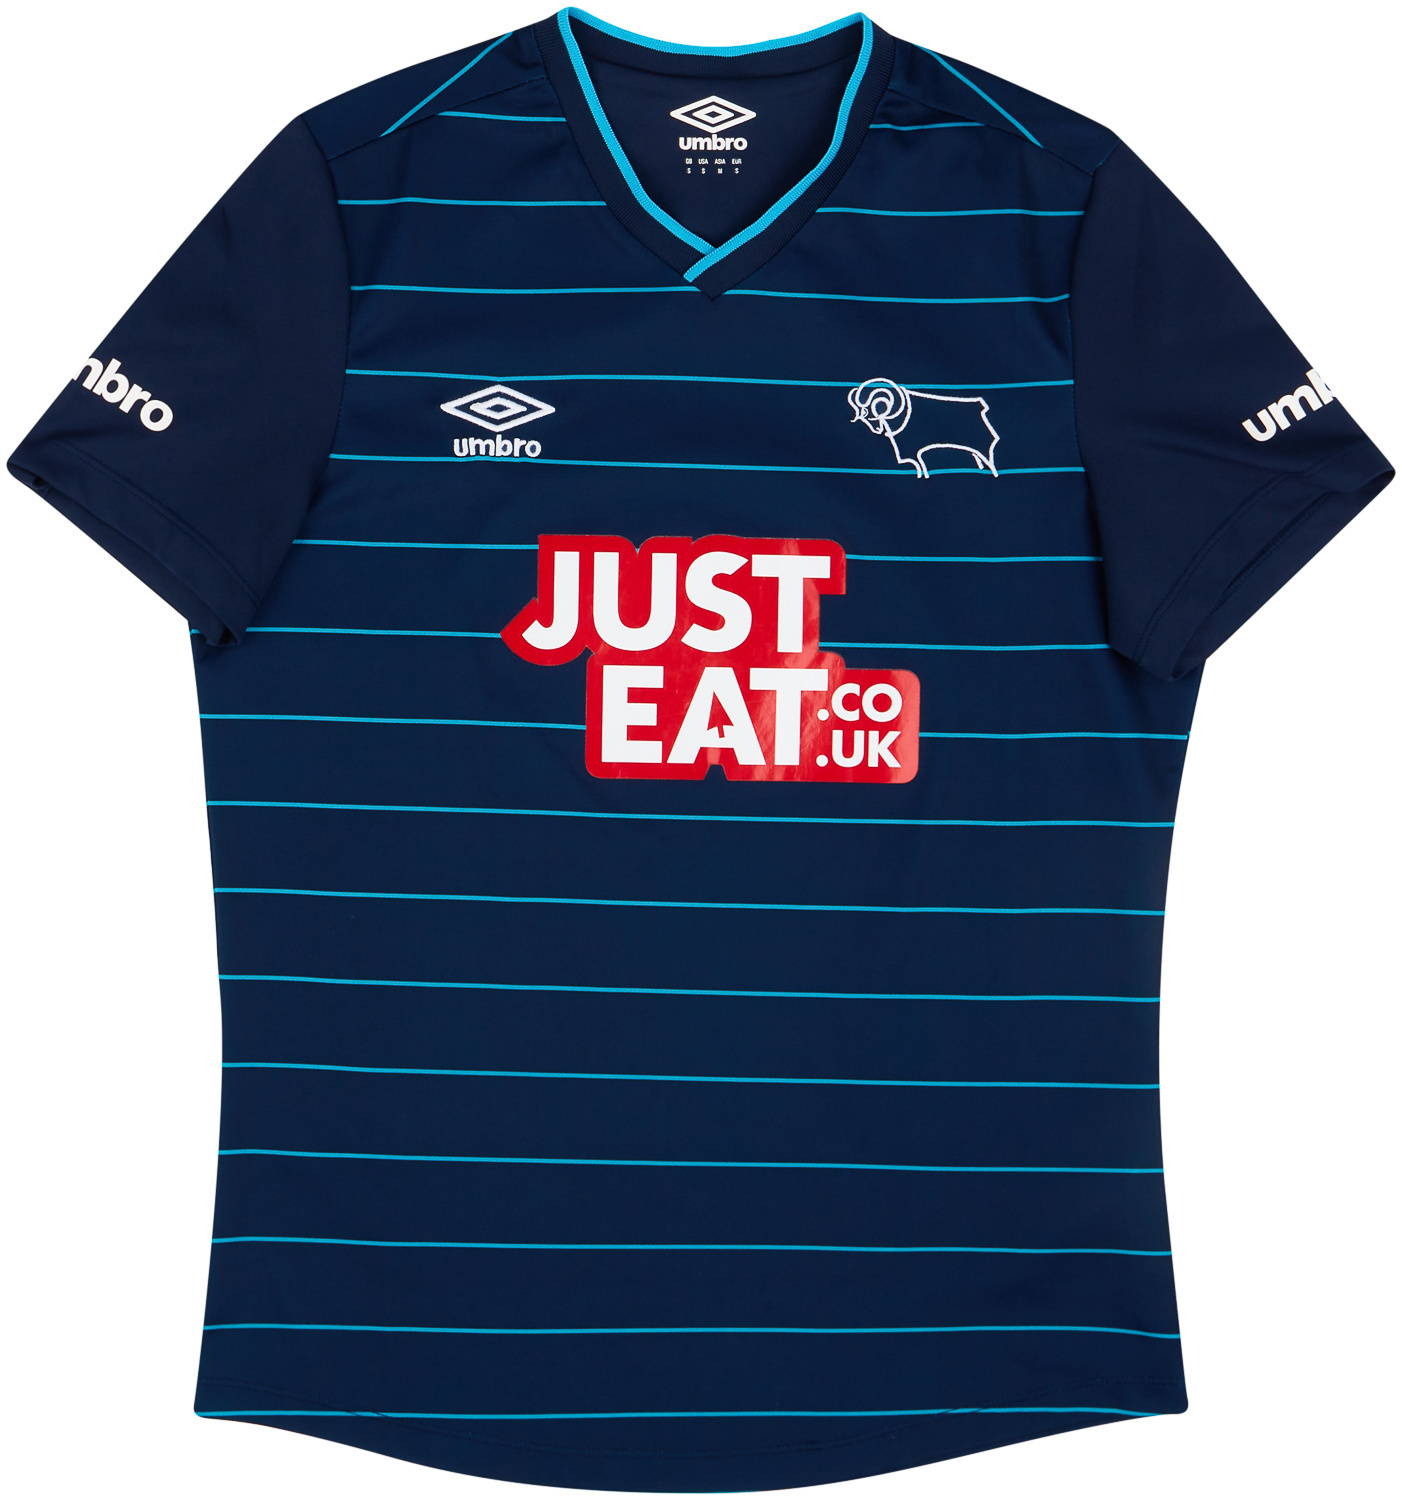 2014-15 Derby County Away Shirt - 8/10 - ()